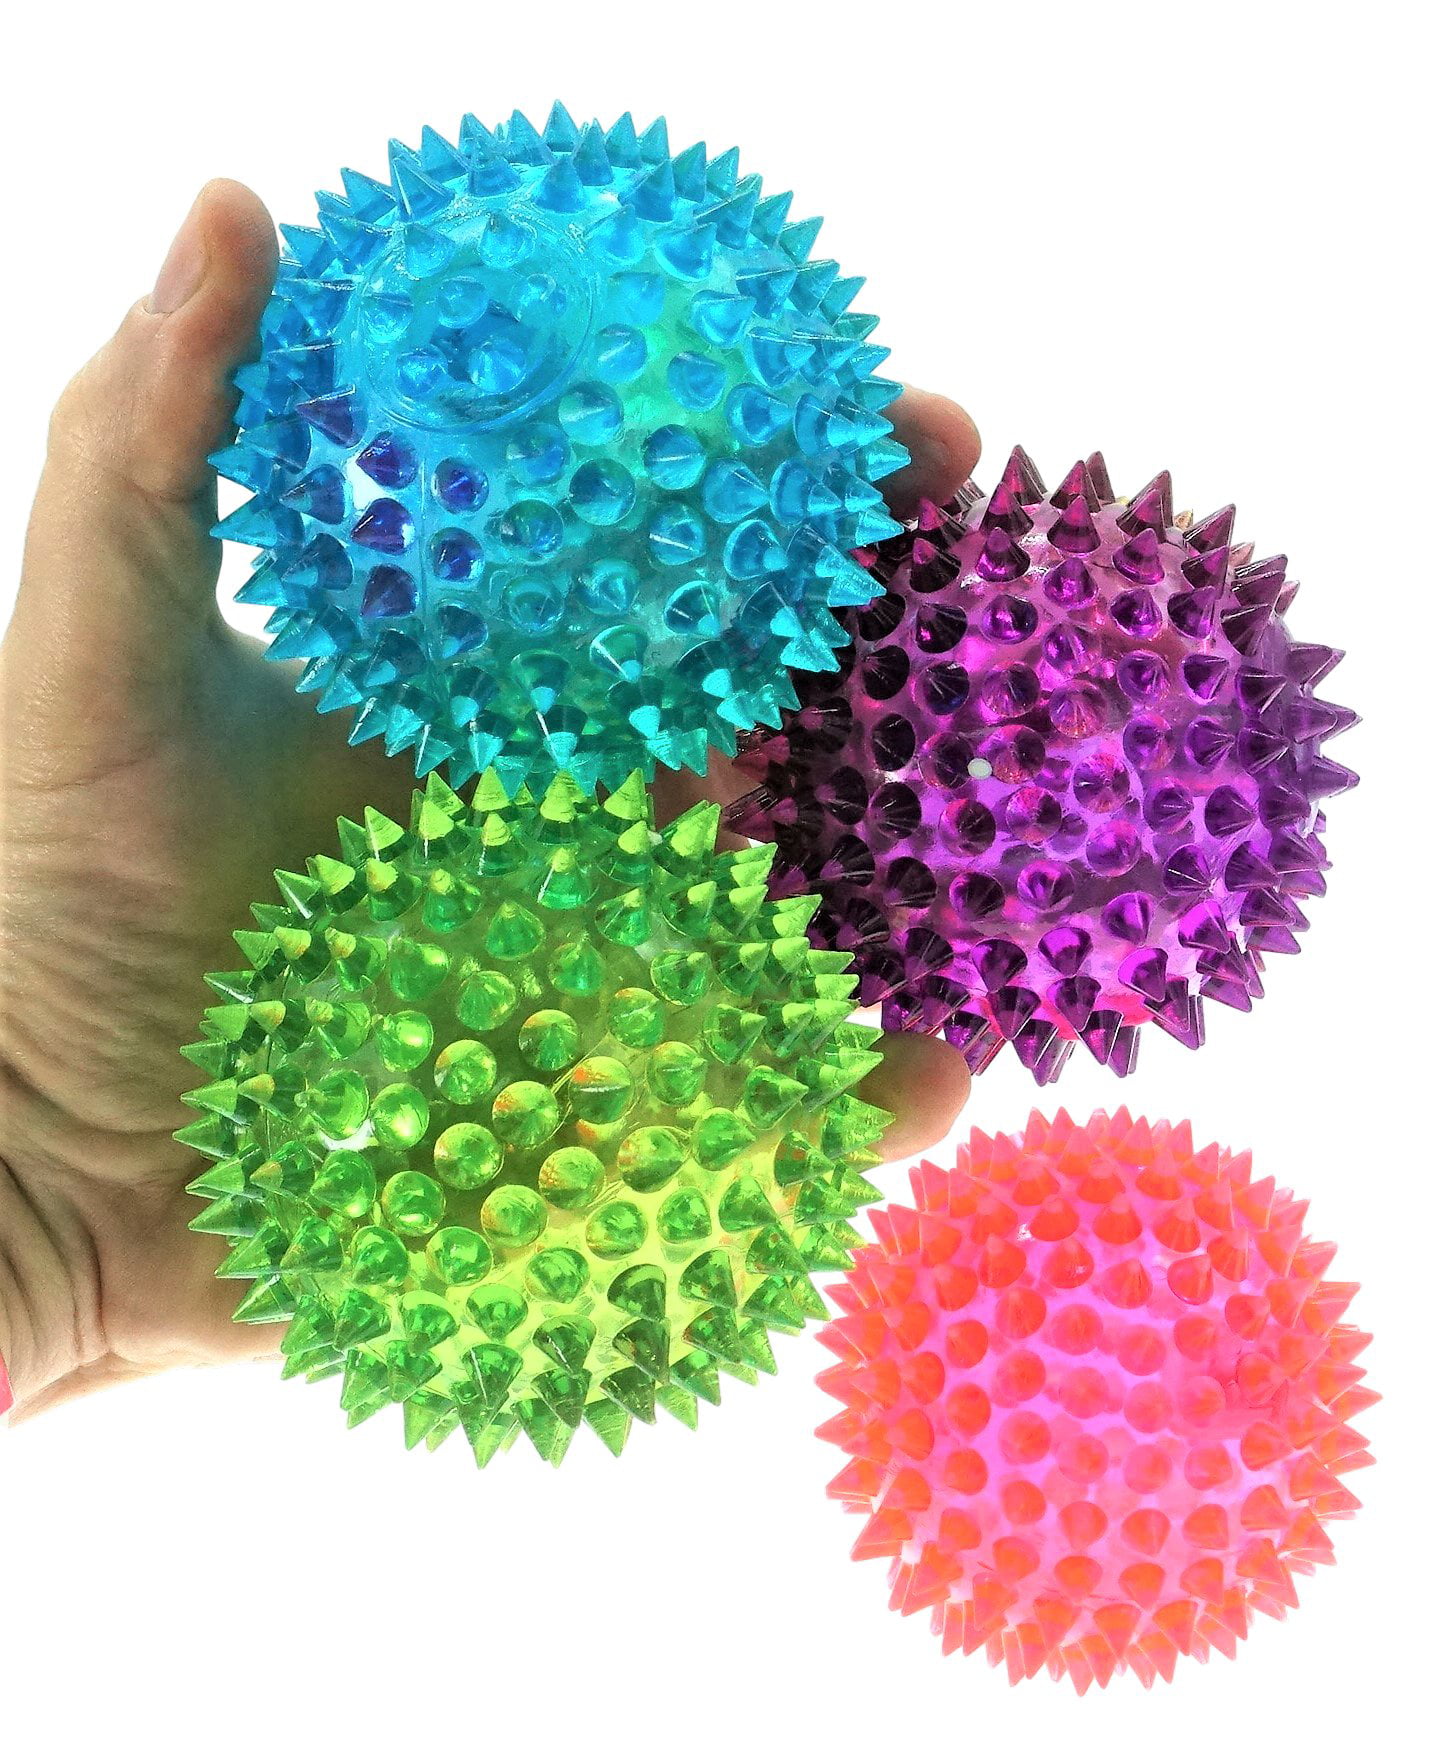 699-4s Strobe Flashing Lights Soft Colorful Cool Bouncy Stress Ball Fidget Ball Toy Therapy Balls Plus 1 Sticker Pack of 4 Balls Large 3.25 Light Up Spike Rubber Ball Party Favor in Bulk 